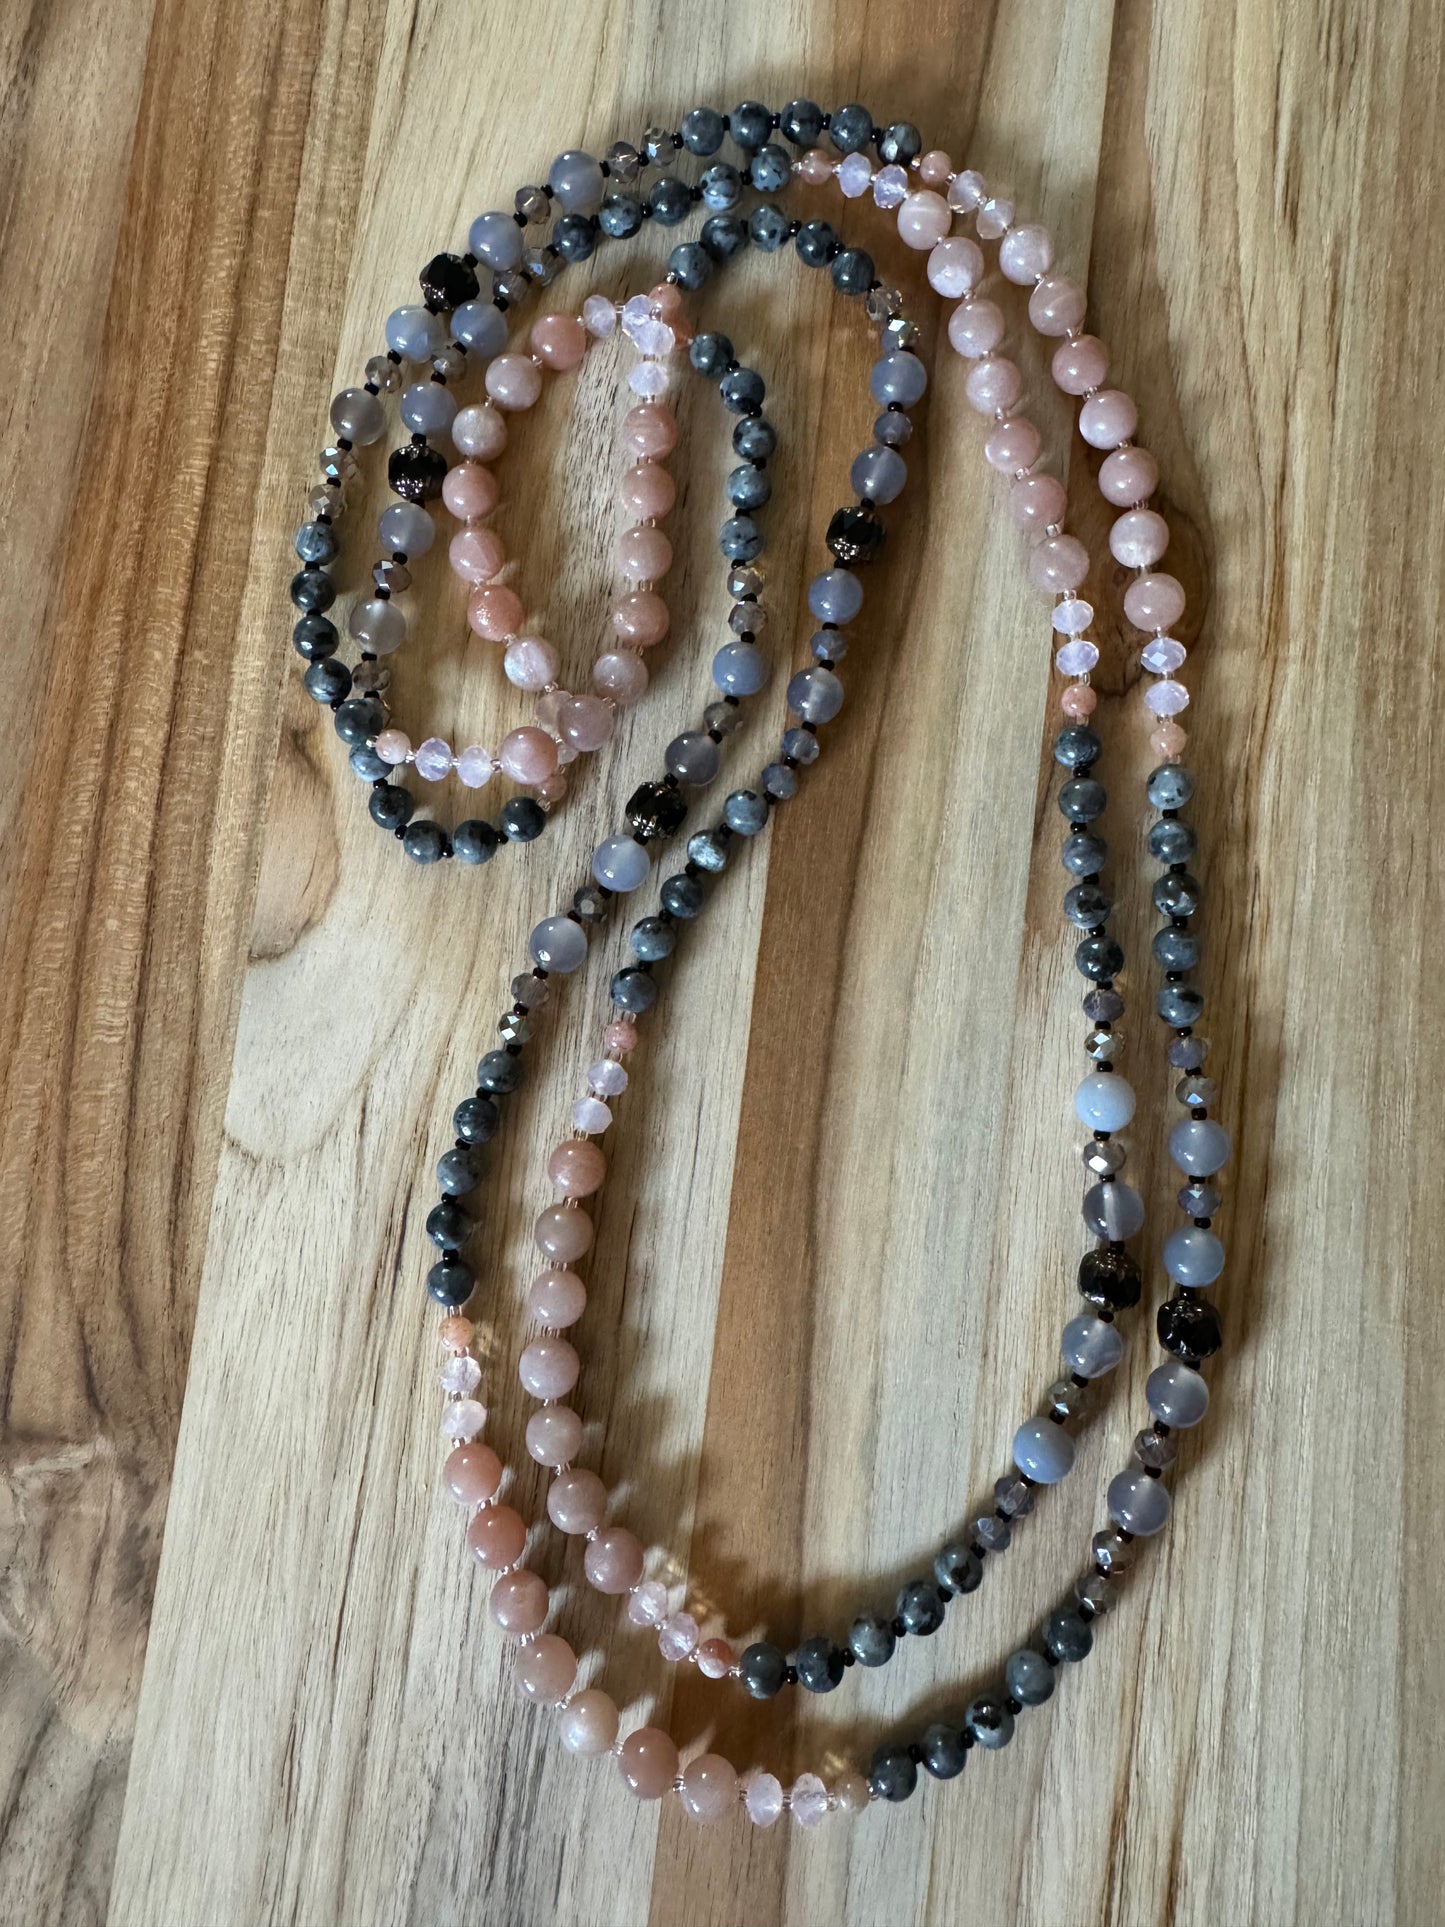 60” Extra Long Color Block Wraparound Style Beaded Necklace with Peach Sunstone Grey Agate Larvikite Black Czech Glass and Crystal Beads -My Urban Gems